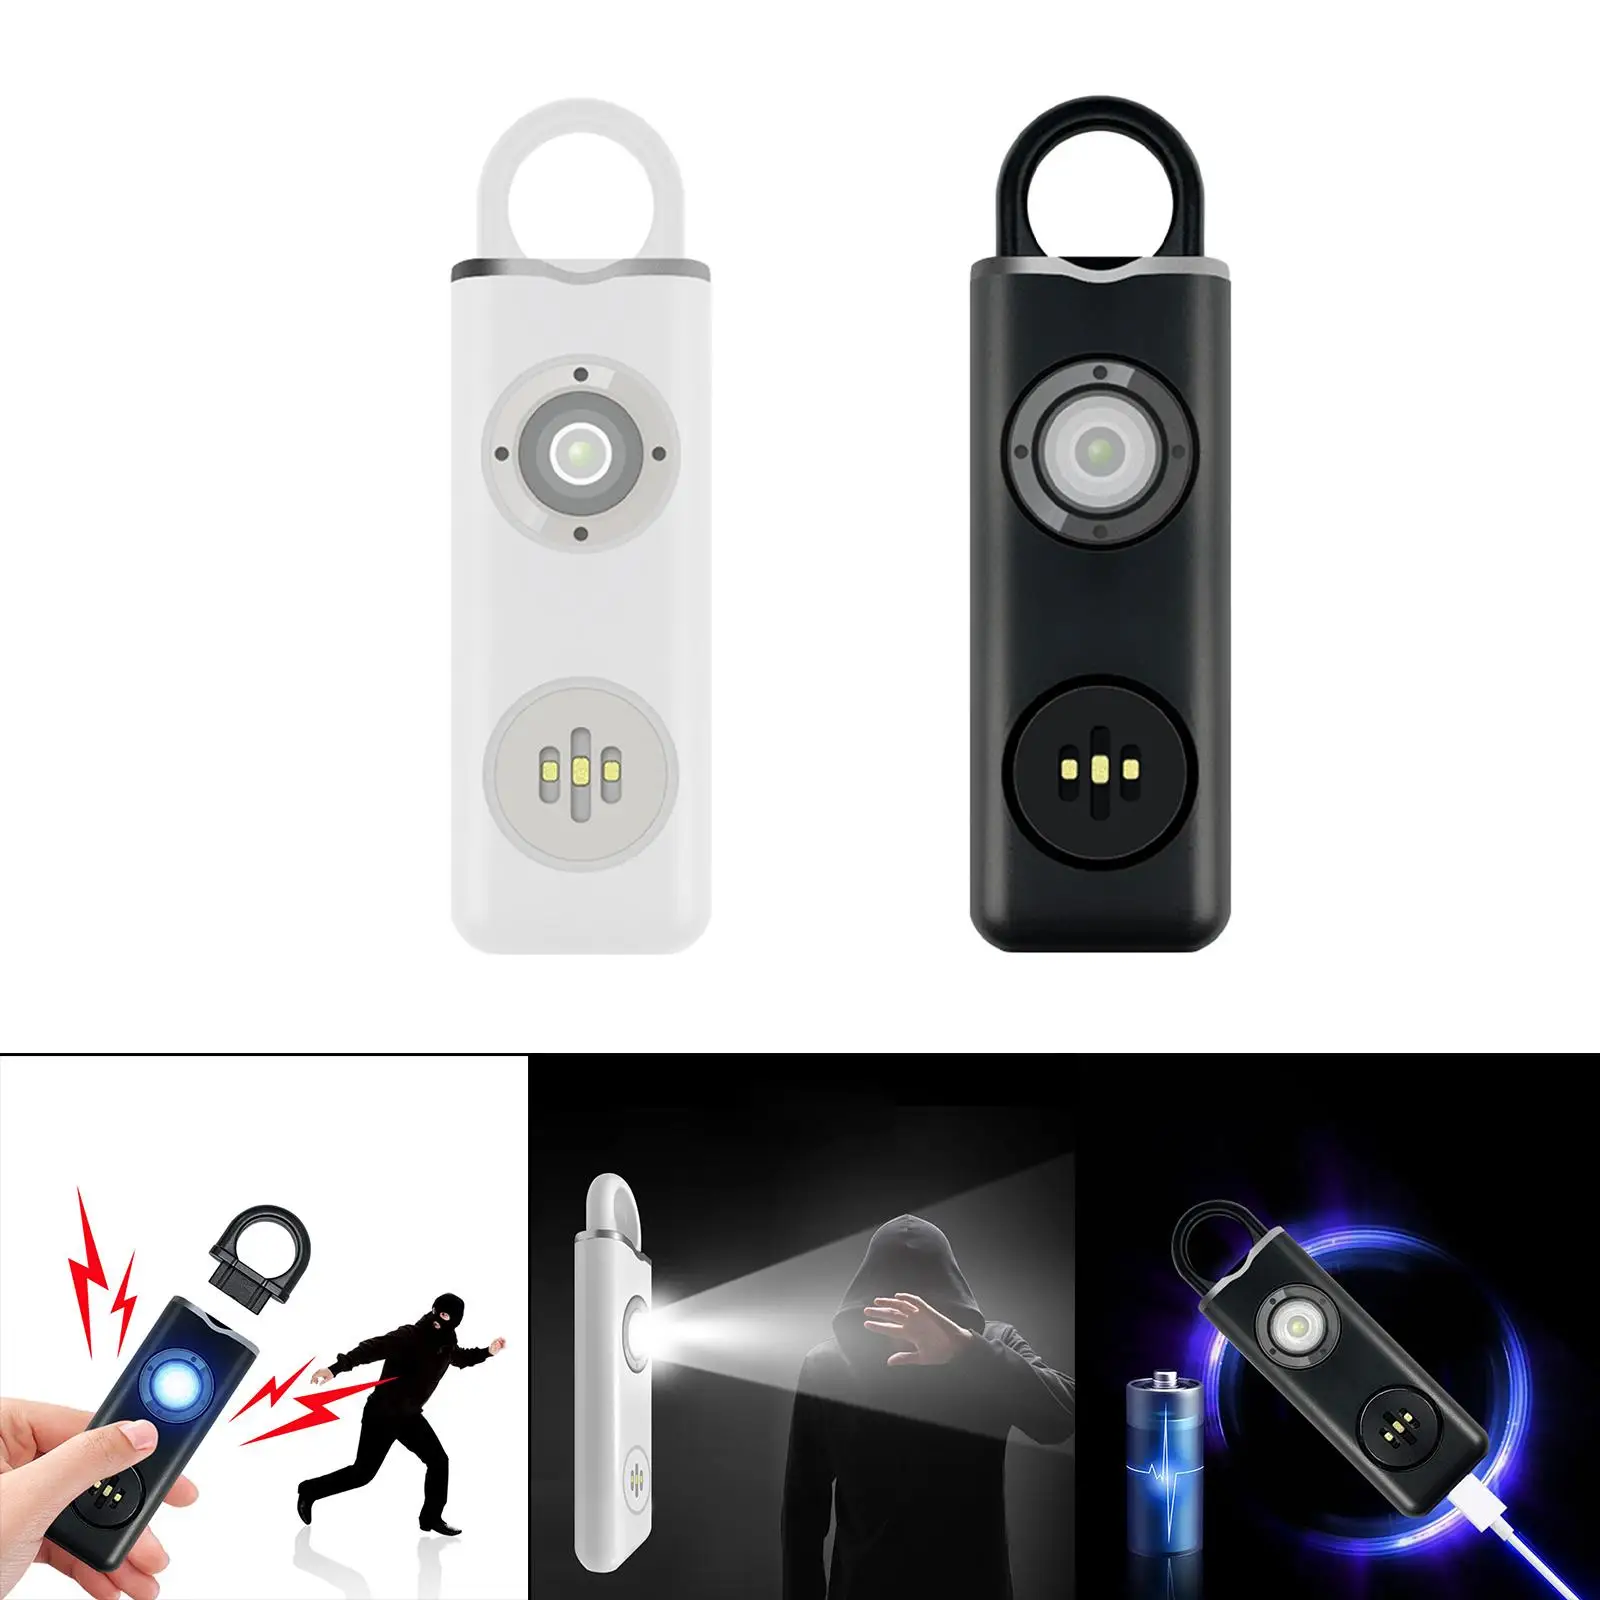 130dB Personal Alarm with LED Lights Carabiner Emergency Safety Alarm Alarm Sound Safety for Camping Hiking